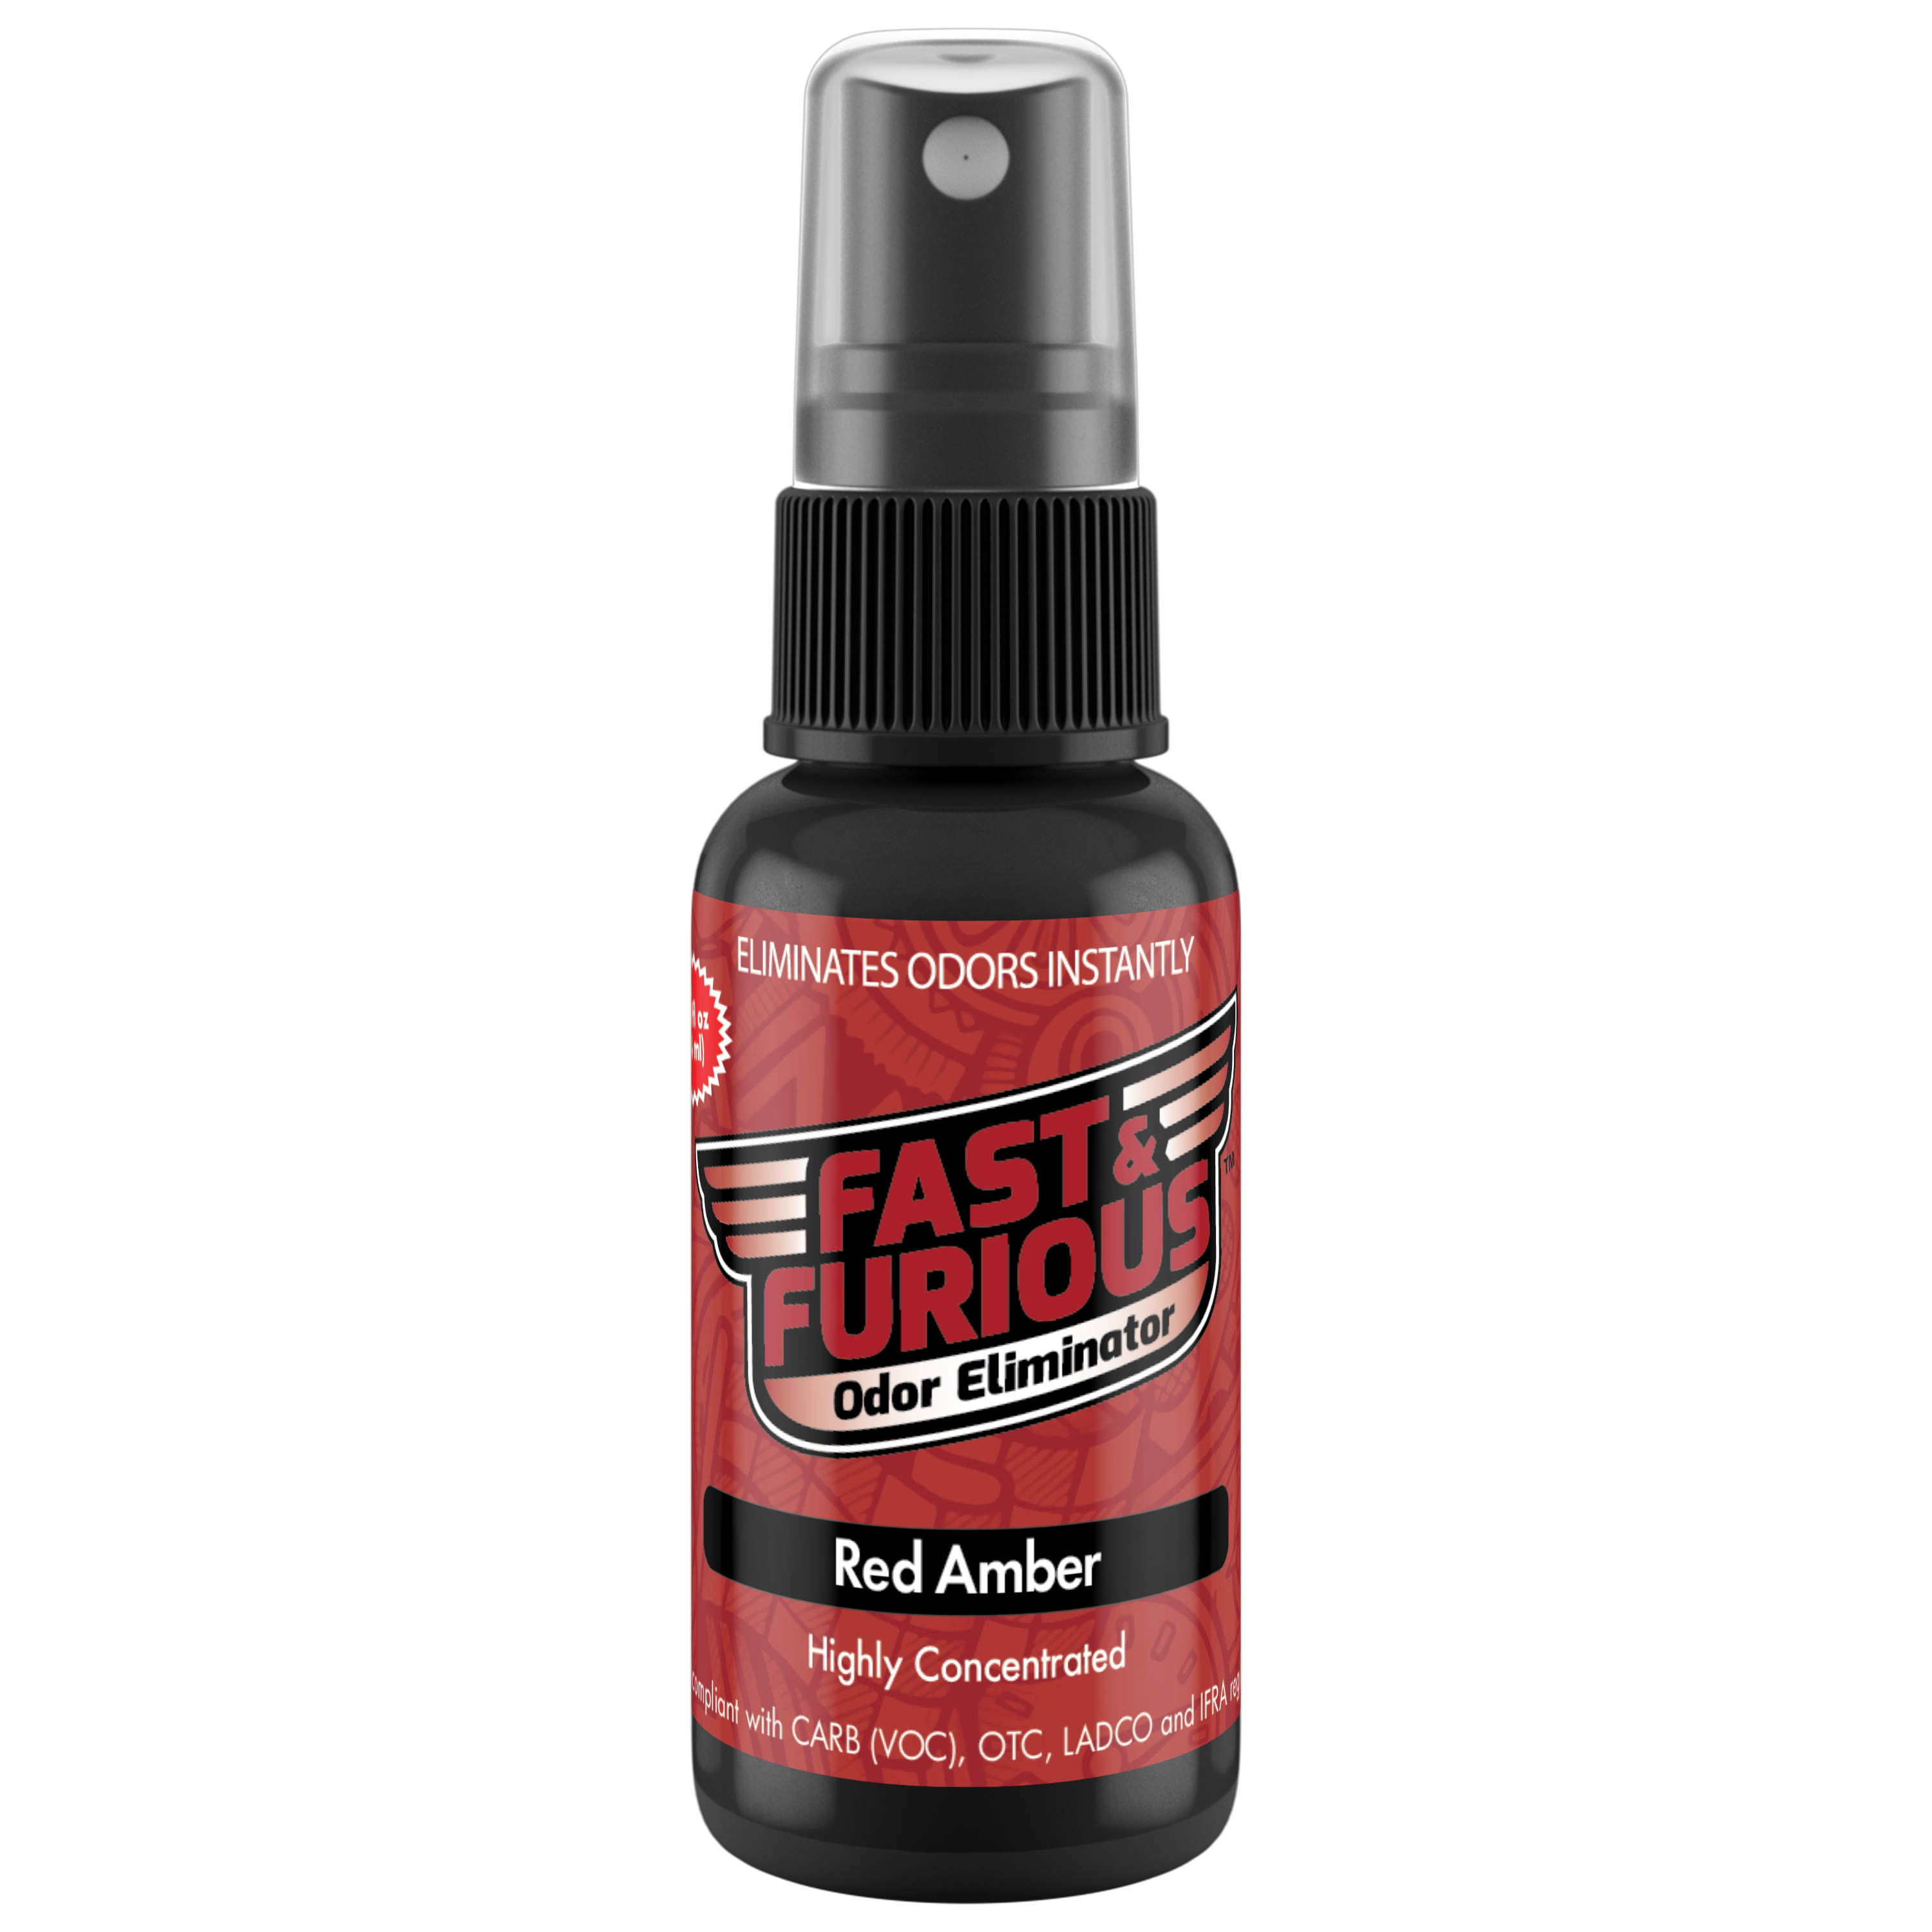 Fast and Furious Odor Eliminator - Red Amber Scent